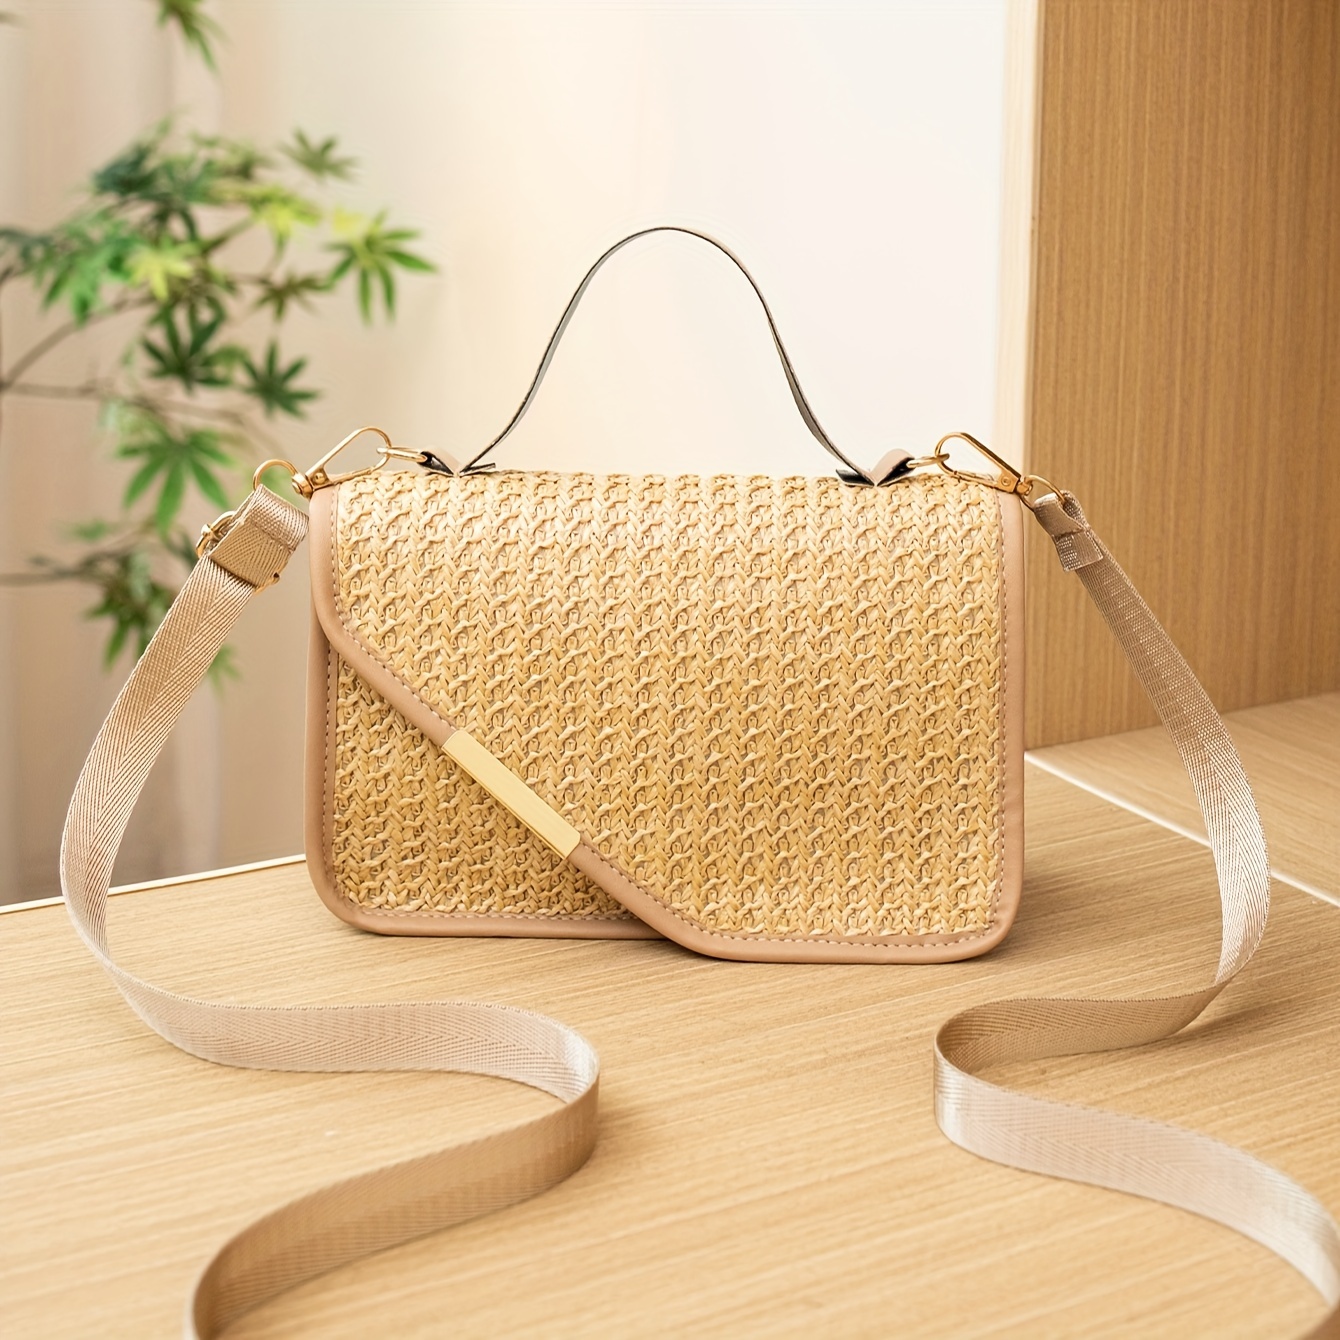 

Women's Casual Beach Straw Woven Handbag, Fashionable Crossbody Shoulder Purse With Flap Closure And Adjustable Strap